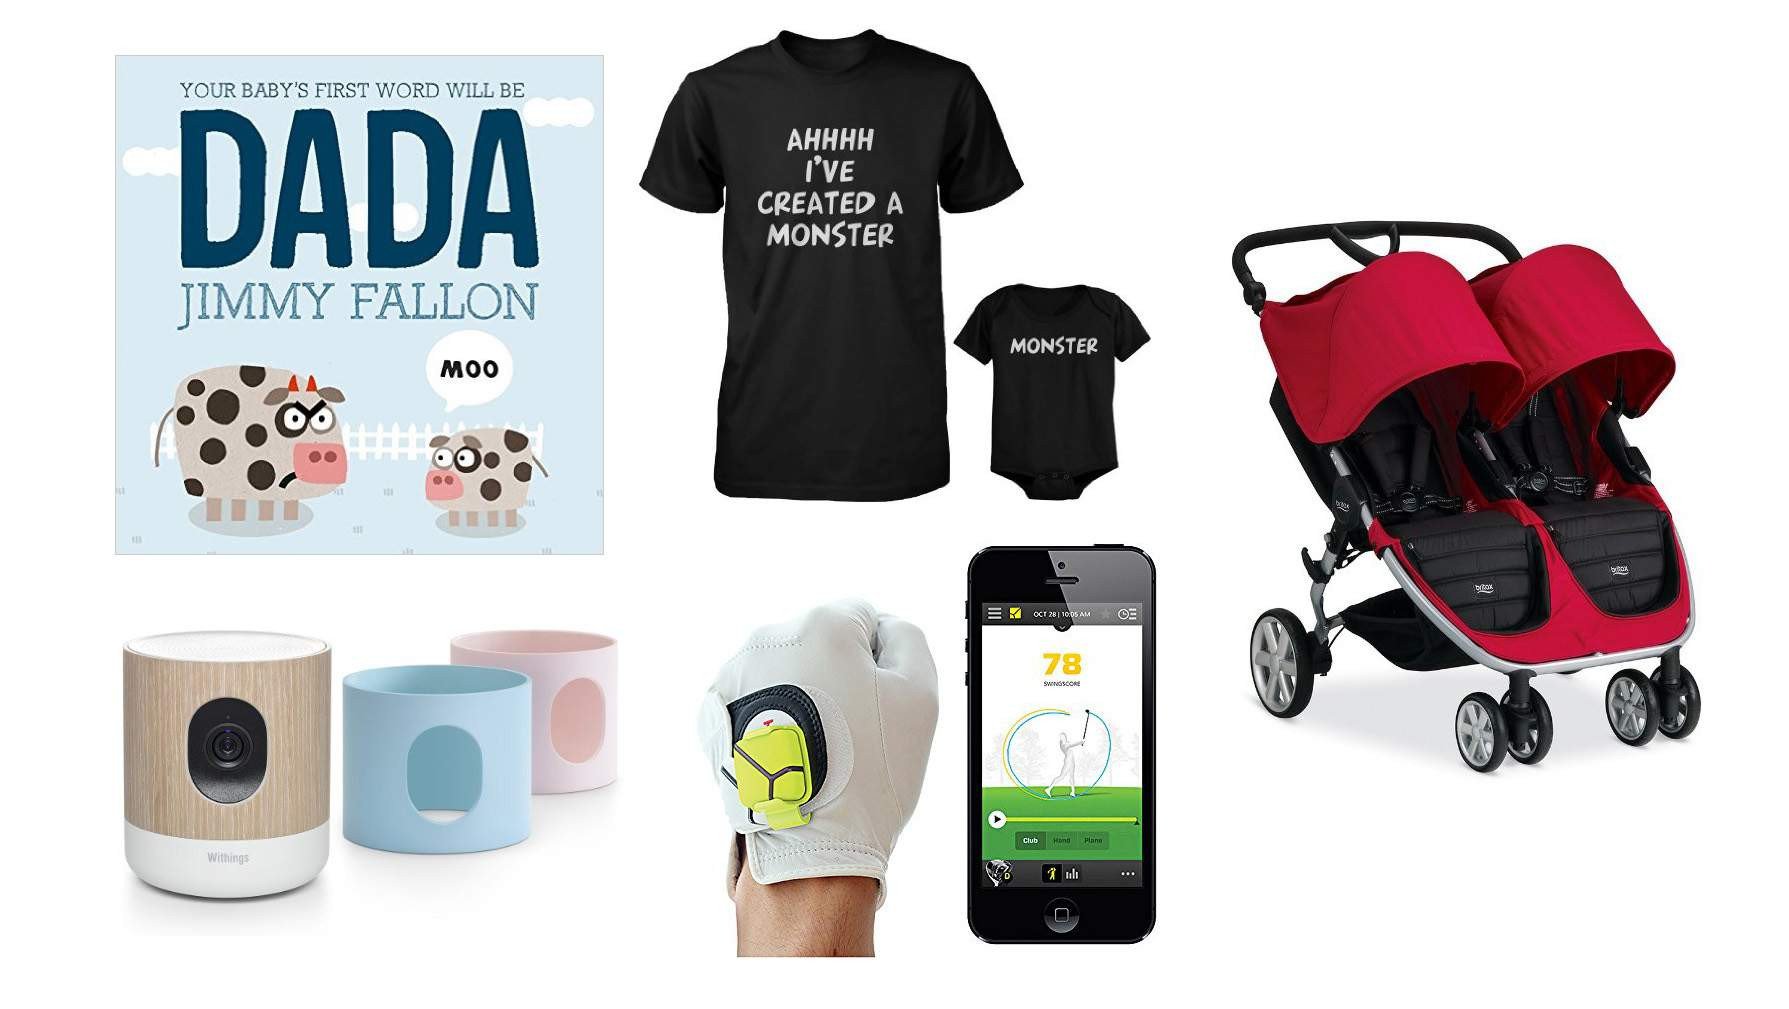 Best Fathers Day Gifts
 Top 10 Best Father’s Day Gifts for New Dads